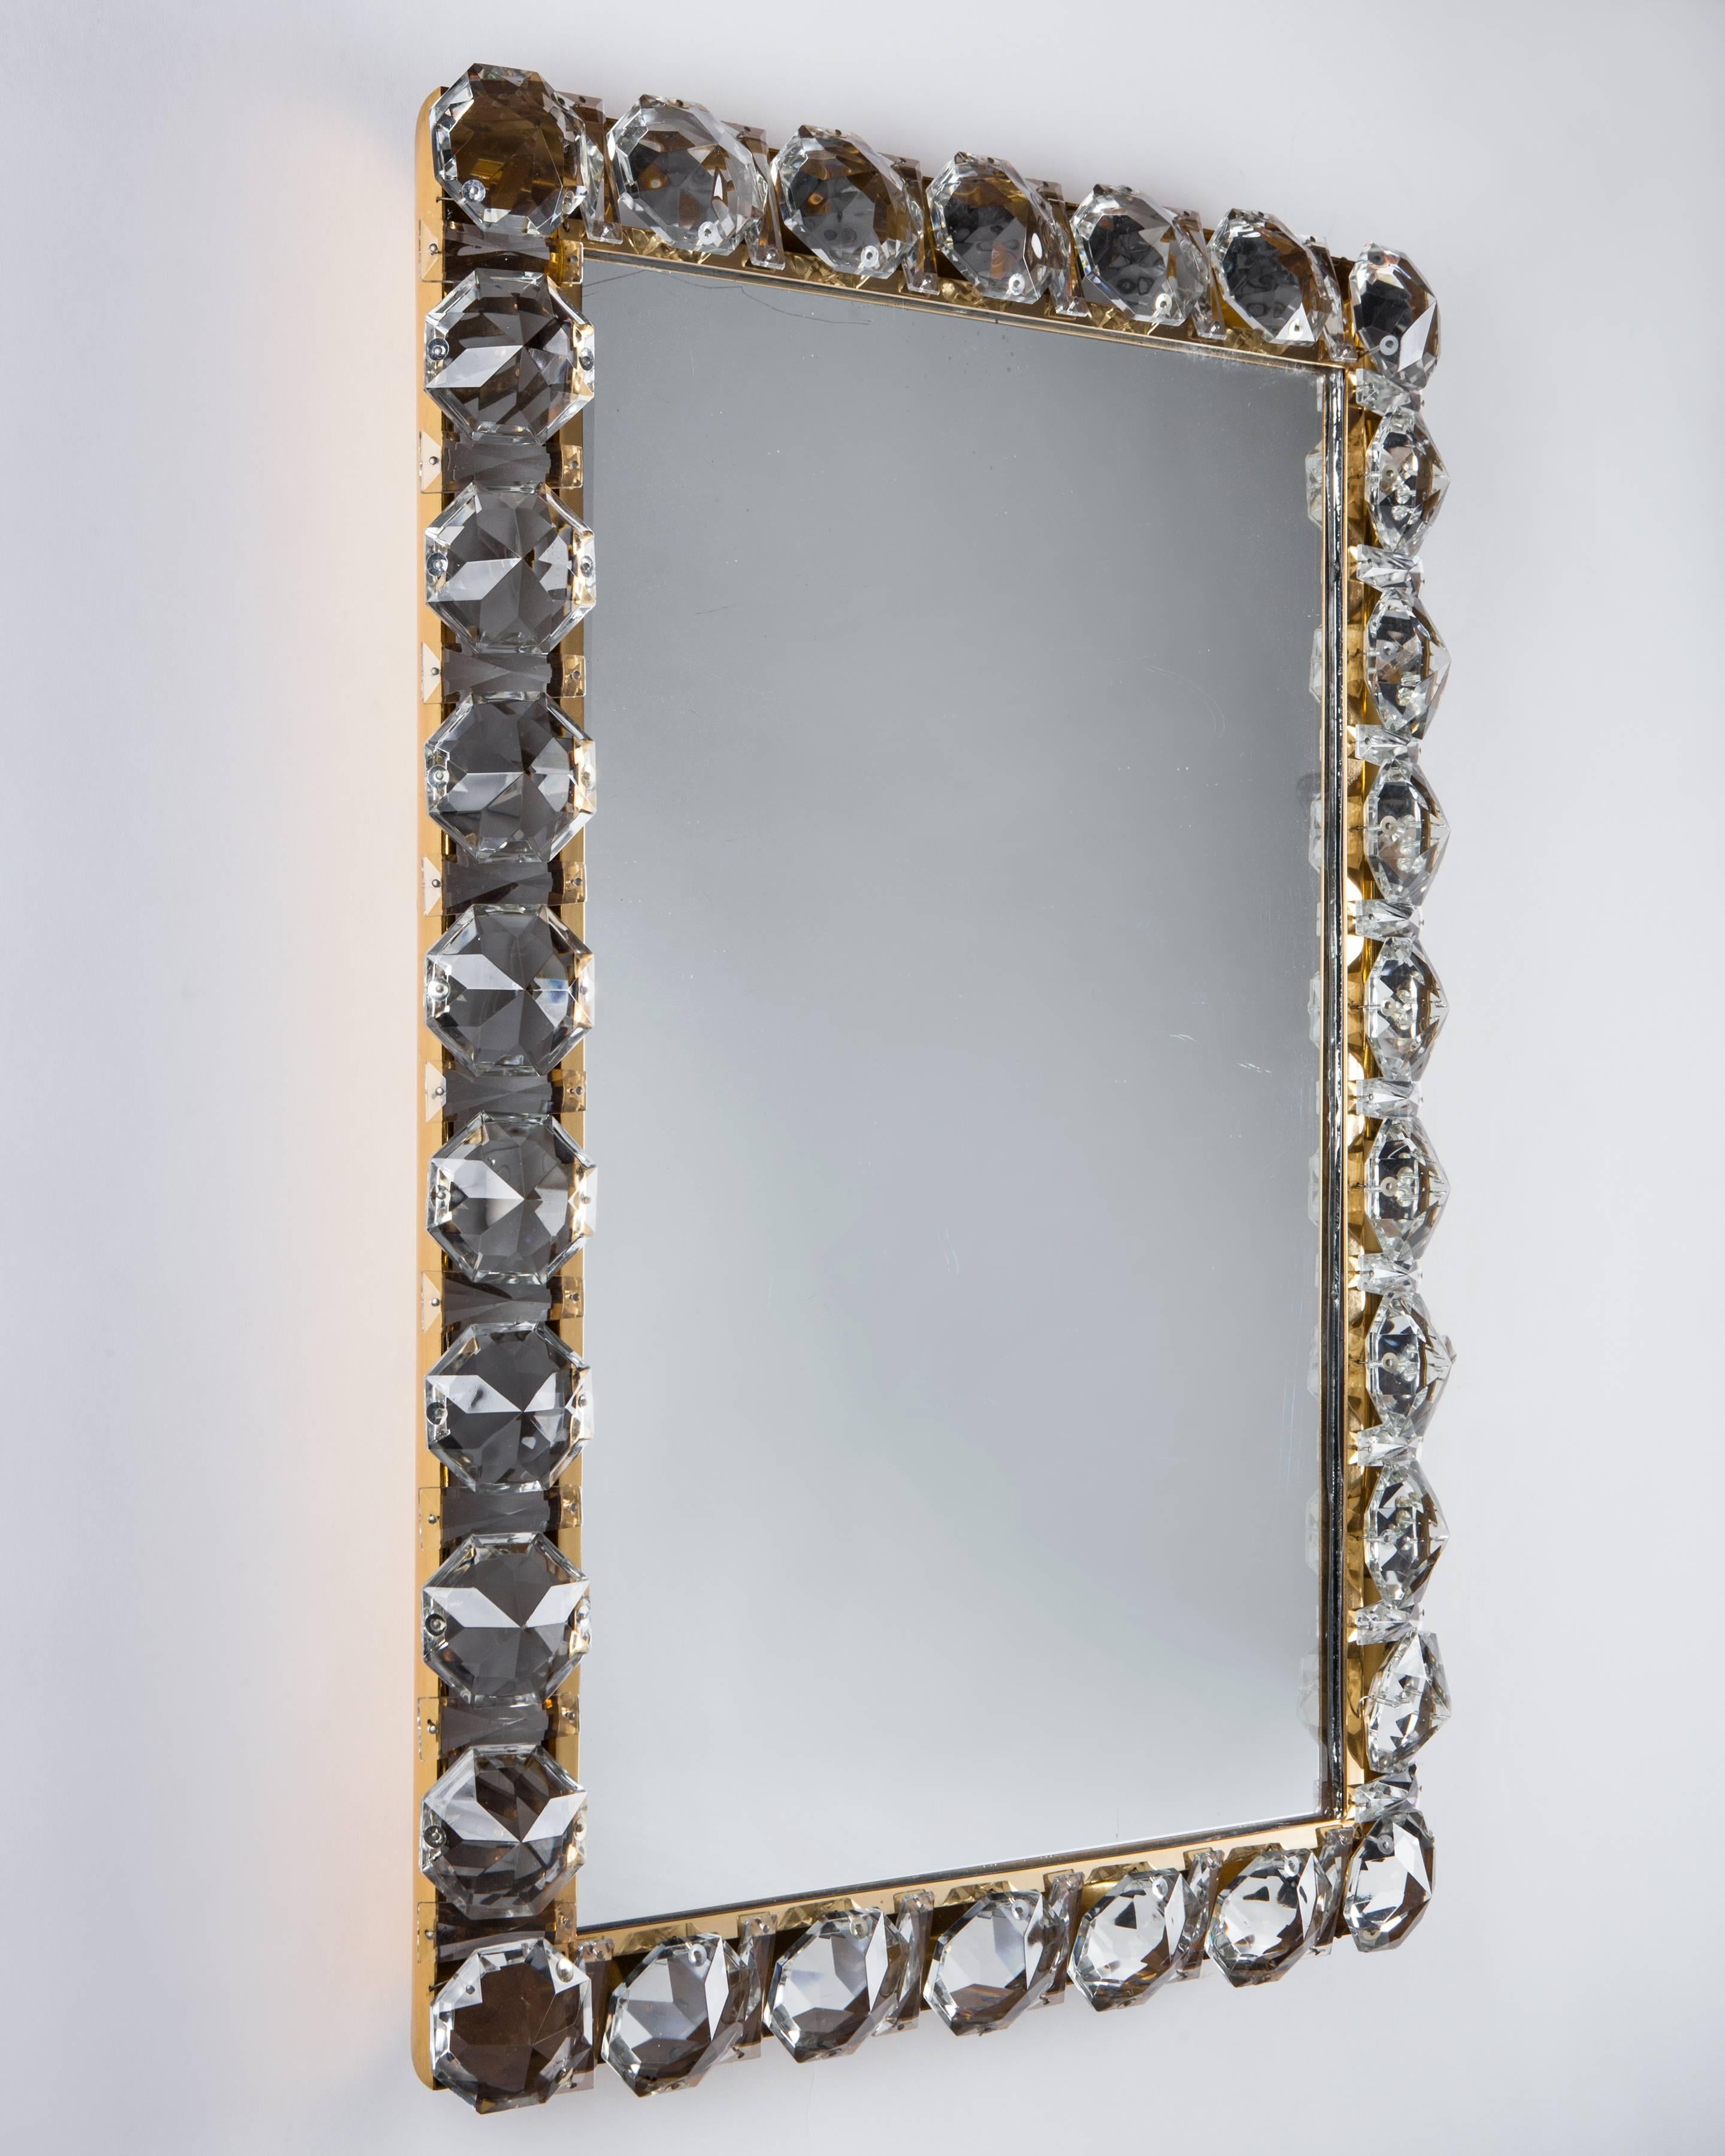 AMR1056
A vintage illuminated mirror set with faceted crystals on a gilded frame. Attributed to the Austrian maker Bakalowits & Sohne. Due to the antique nature of this fixture, there are some nicks or imperfections in the